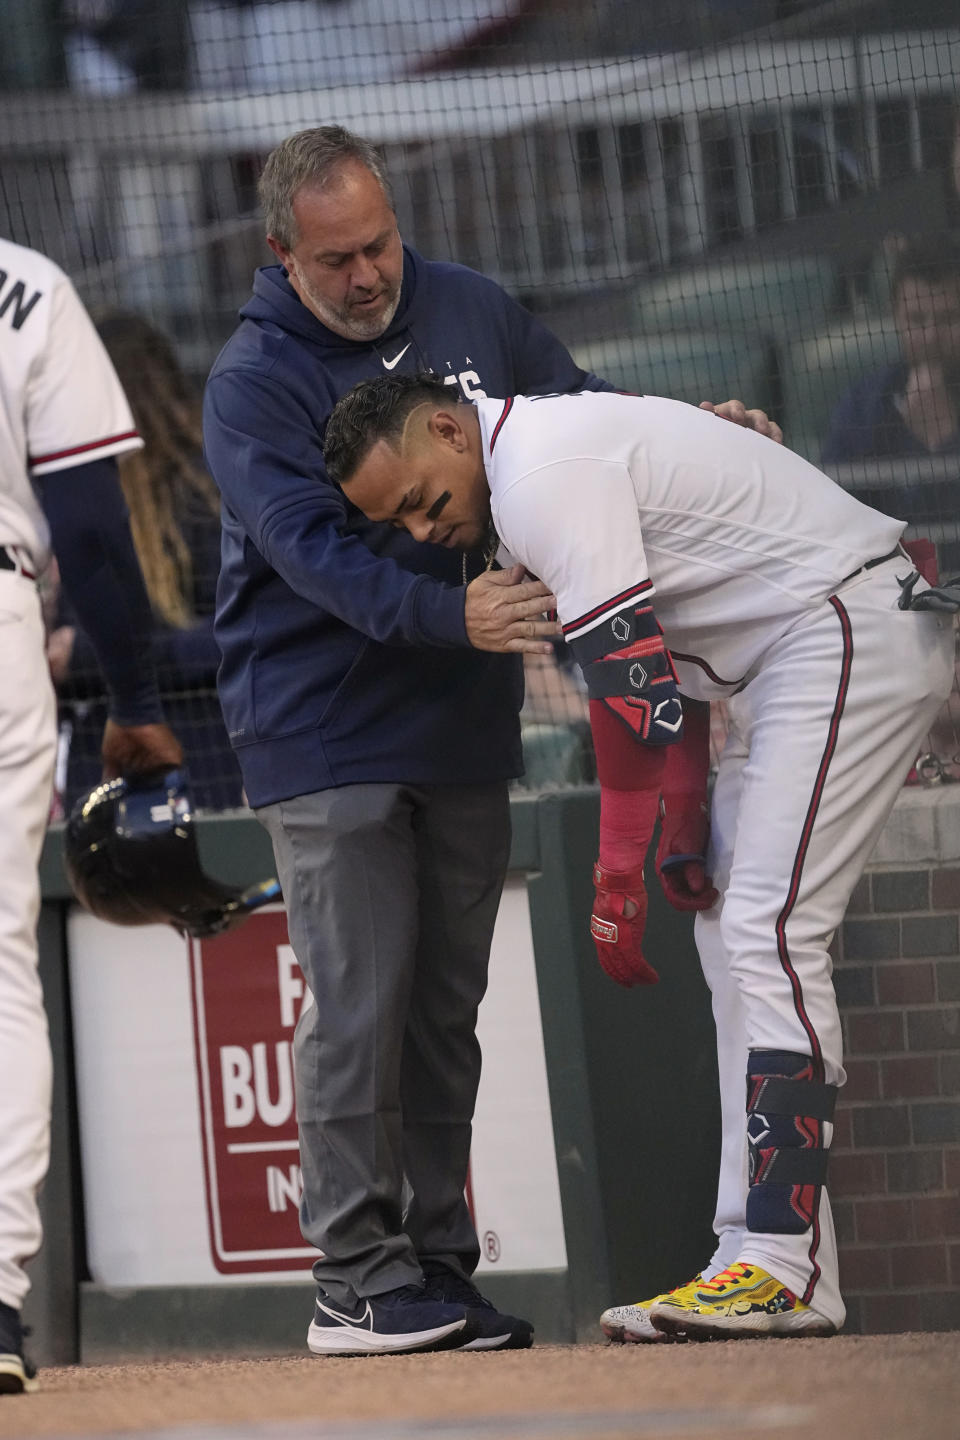 Atlanta Braves' Orlando Arcia is checked by a member of the training staff after he was hit by a pitch during the second inning of the team's baseball game against the Cincinnati Reds on Wednesday, April 12, 2023, in Atlanta. (AP Photo/John Bazemore)